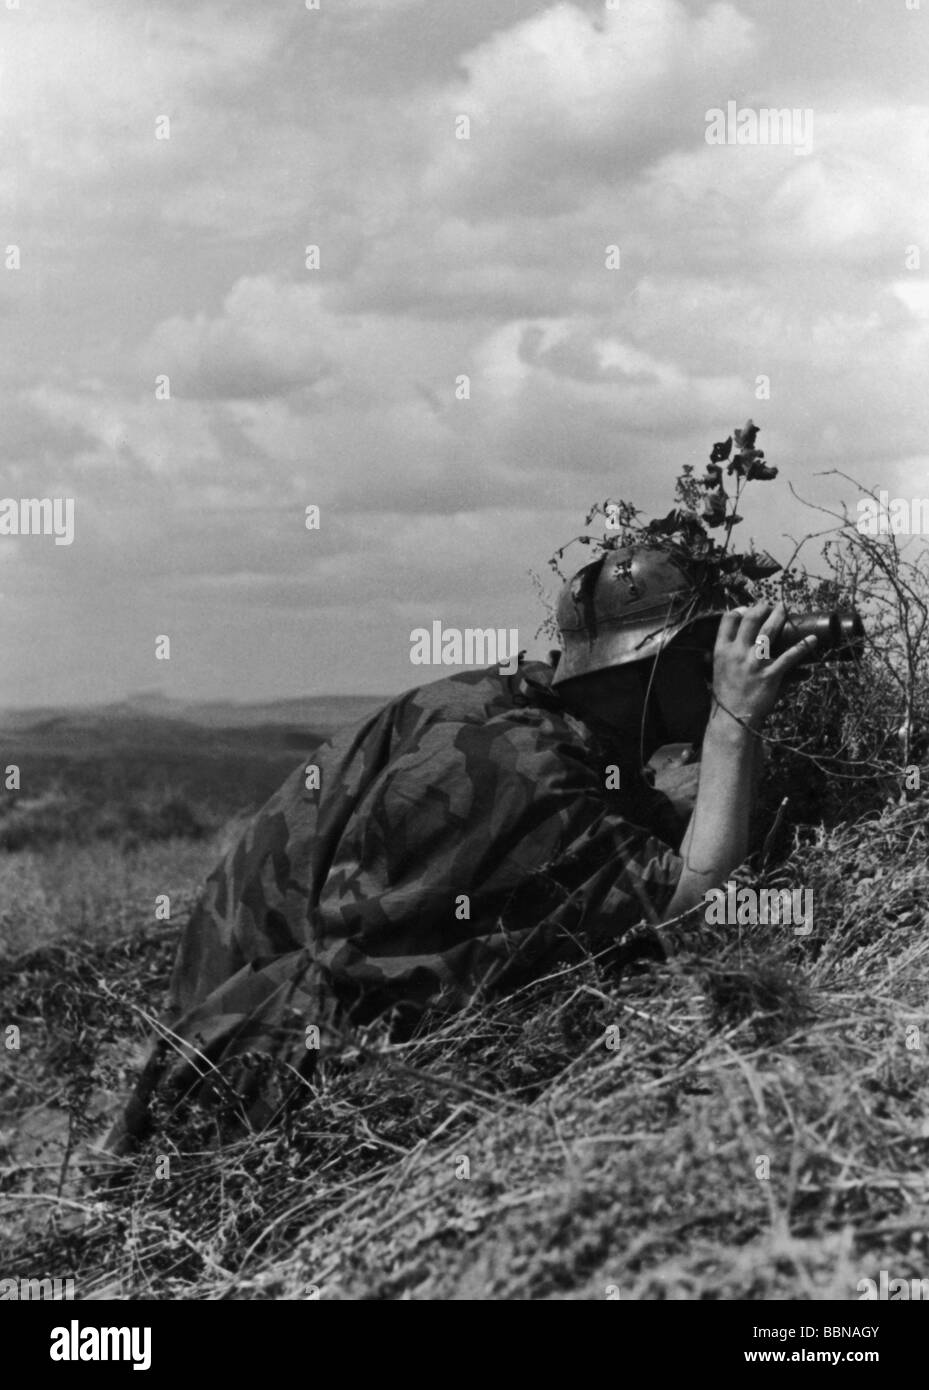 events, Second World War / WWII, Russia 1942 / 1943, German soldier observing enemy positions with binoculars, probably summer 1943, Wehrmacht, camouflage, tent square, steel helmet, cover, 20th century, historic, historical, Eastern Front, USSR, Soviet Union, binocular, 1940s, people, Stock Photo